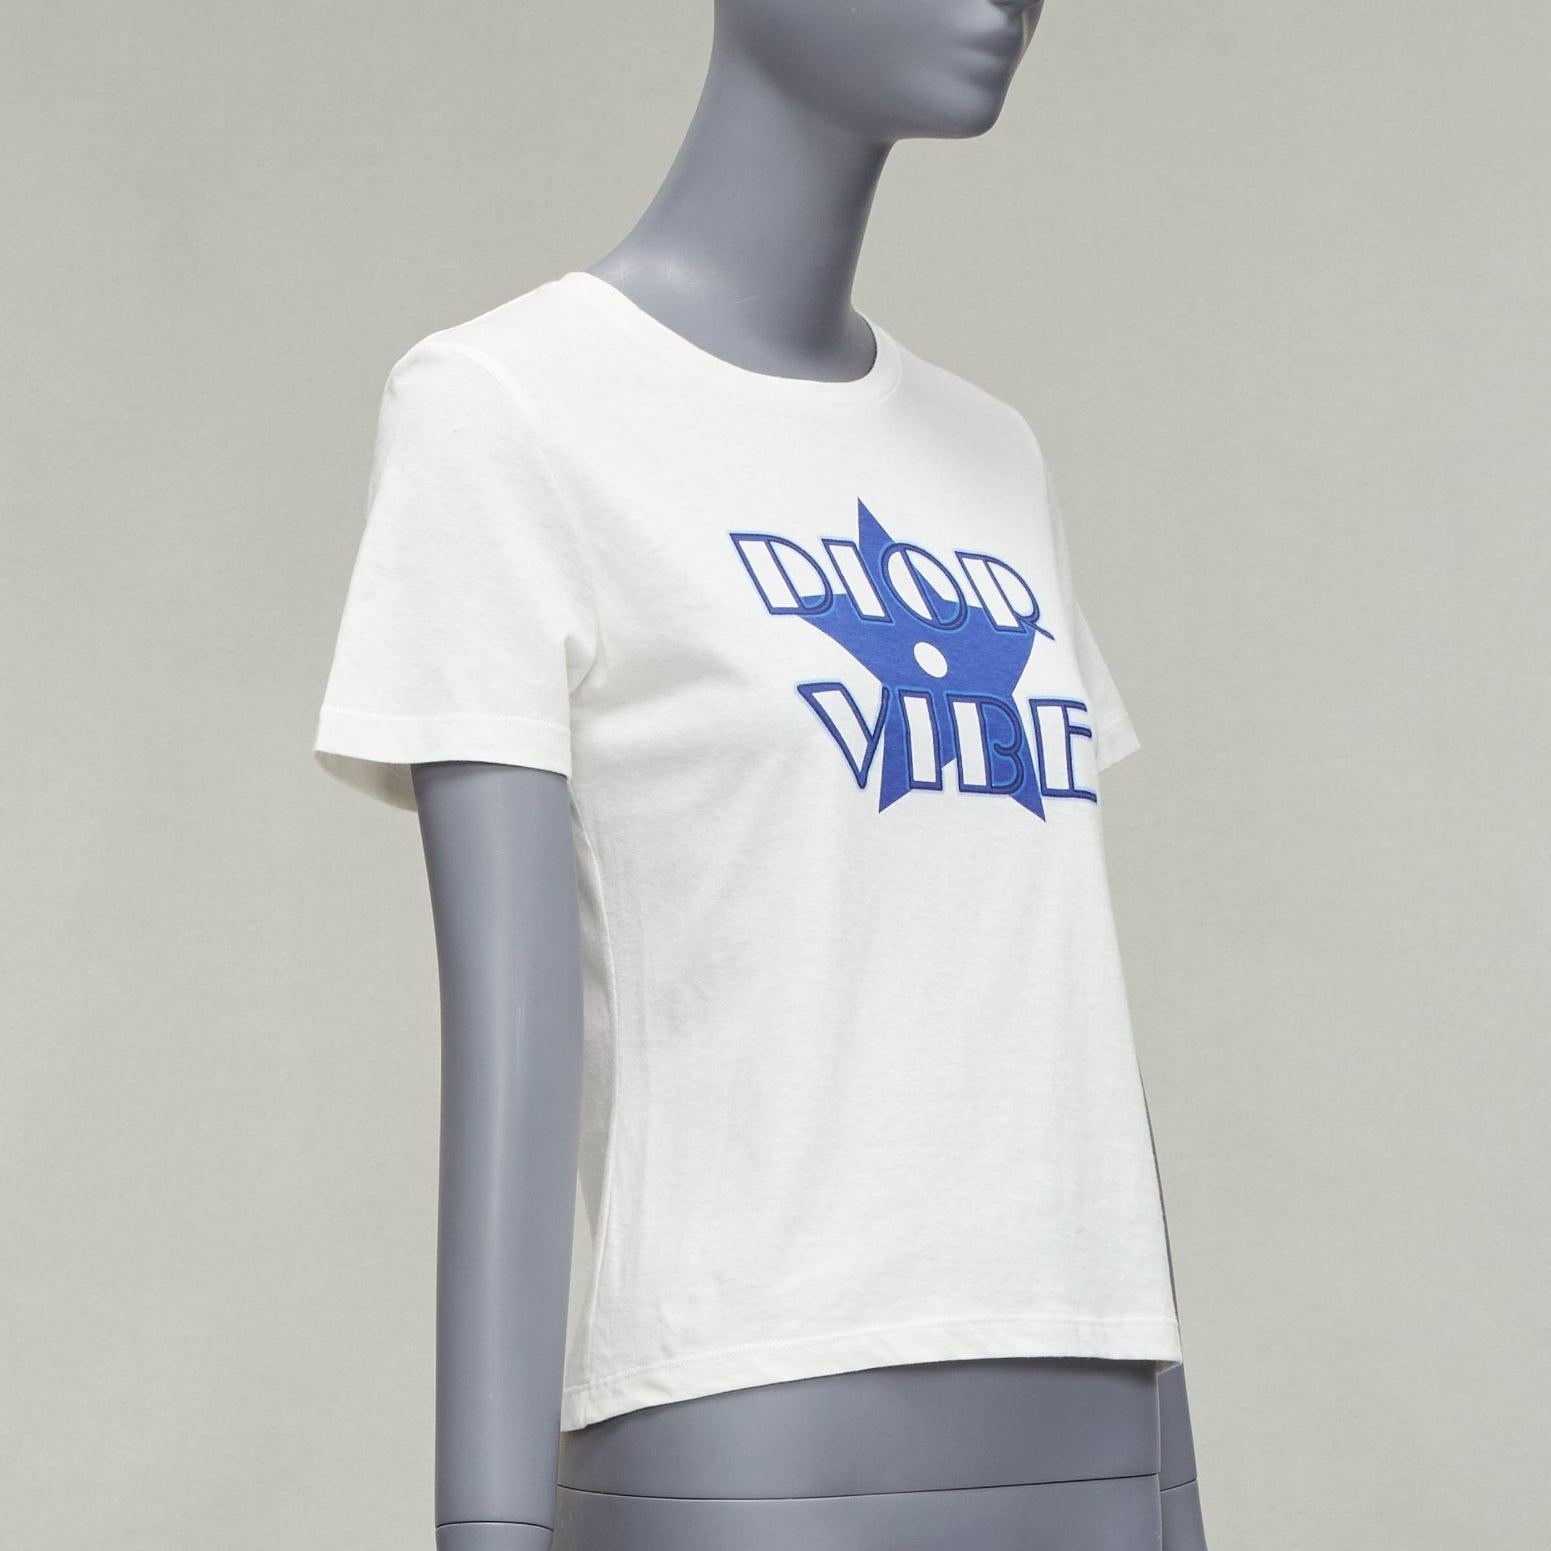 DIOR Vibe blue star logo graphic print white cotton linen short sleeve tshirt XS In Good Condition For Sale In Hong Kong, NT